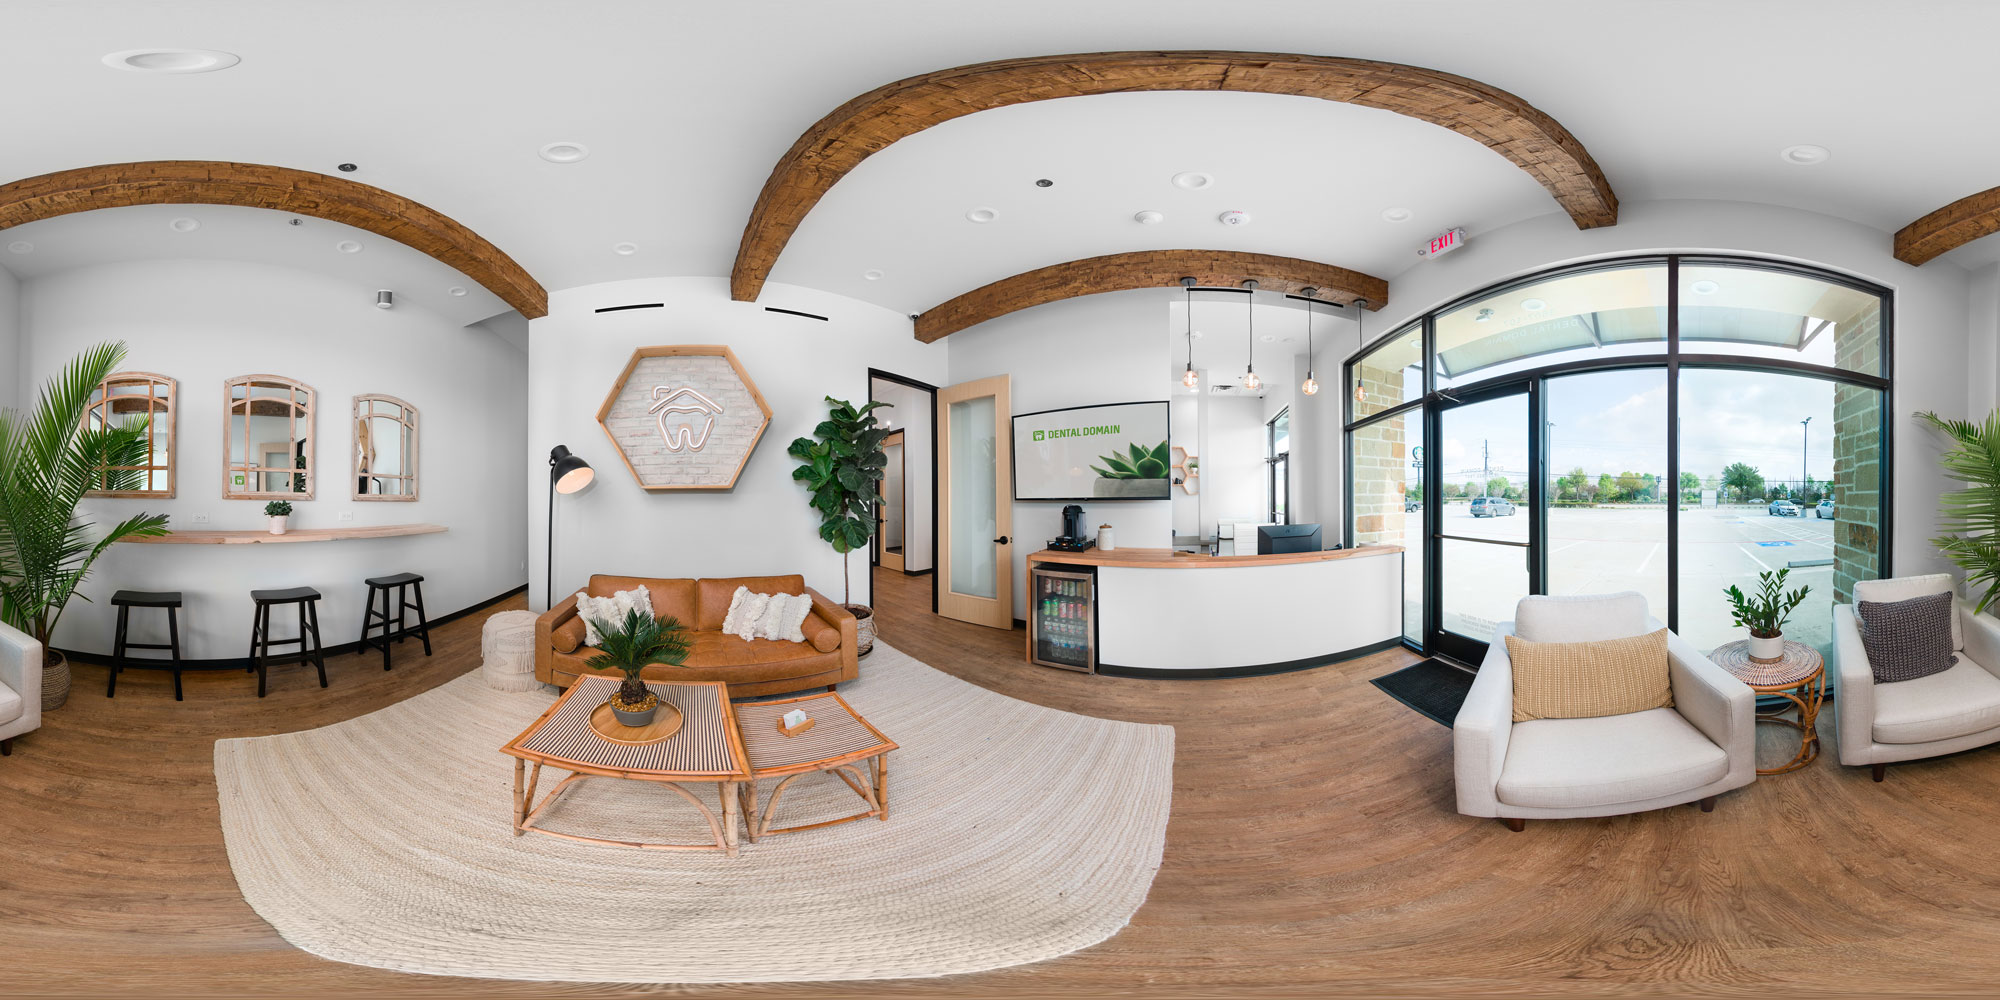 360 Photo of Dental Office from Google Trusted Photography Dee Zunker